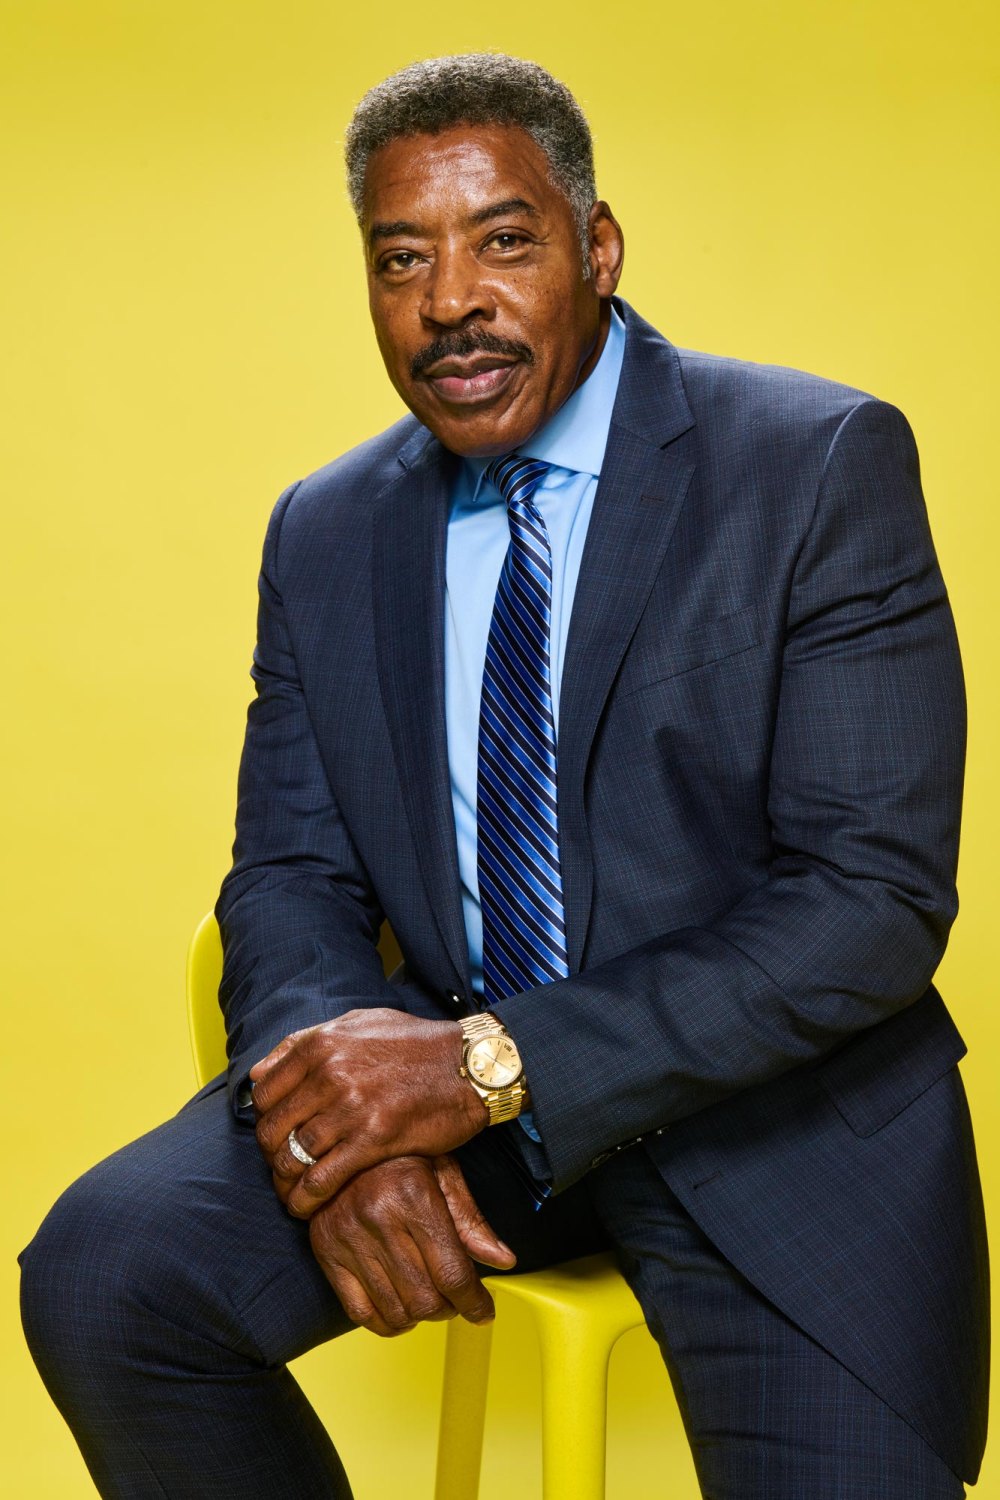 Ernie Hudson Explains Why He Constantly Has to Work Job to Job After 60 Years of Acting